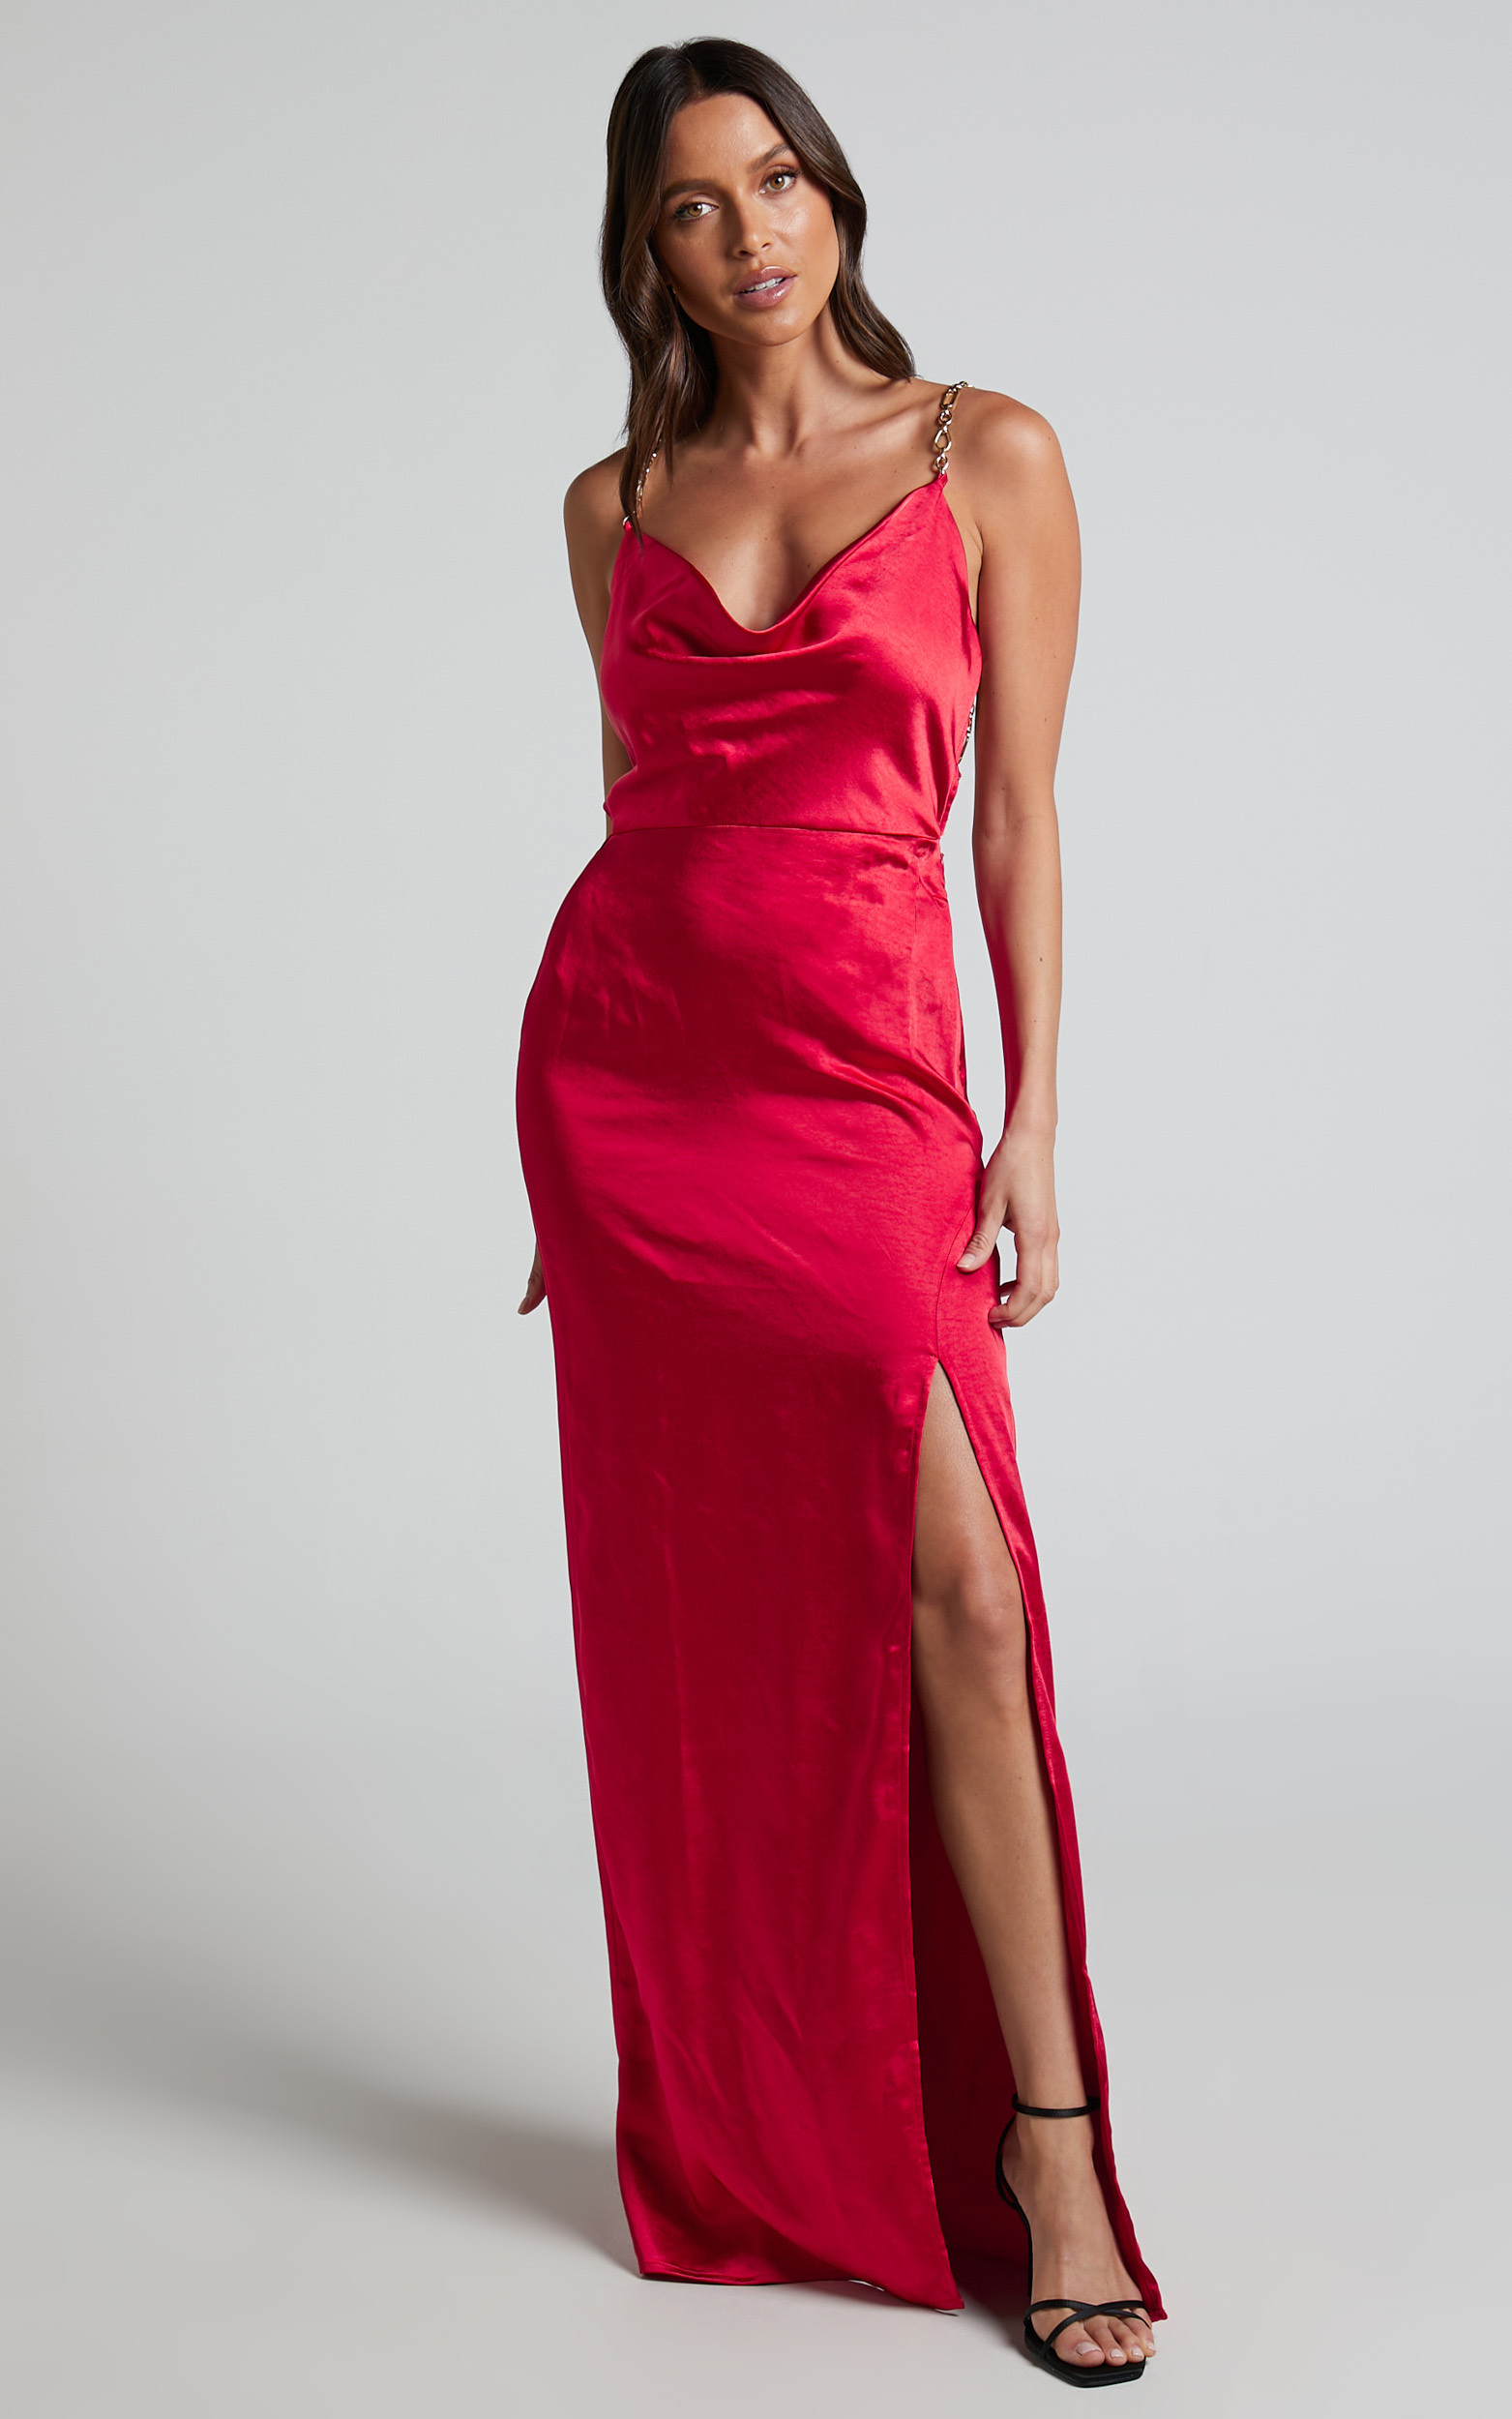 Bravia Chain Strap Open Back Satin Maxi Dress in Red - 06, RED2, hi-res image number null